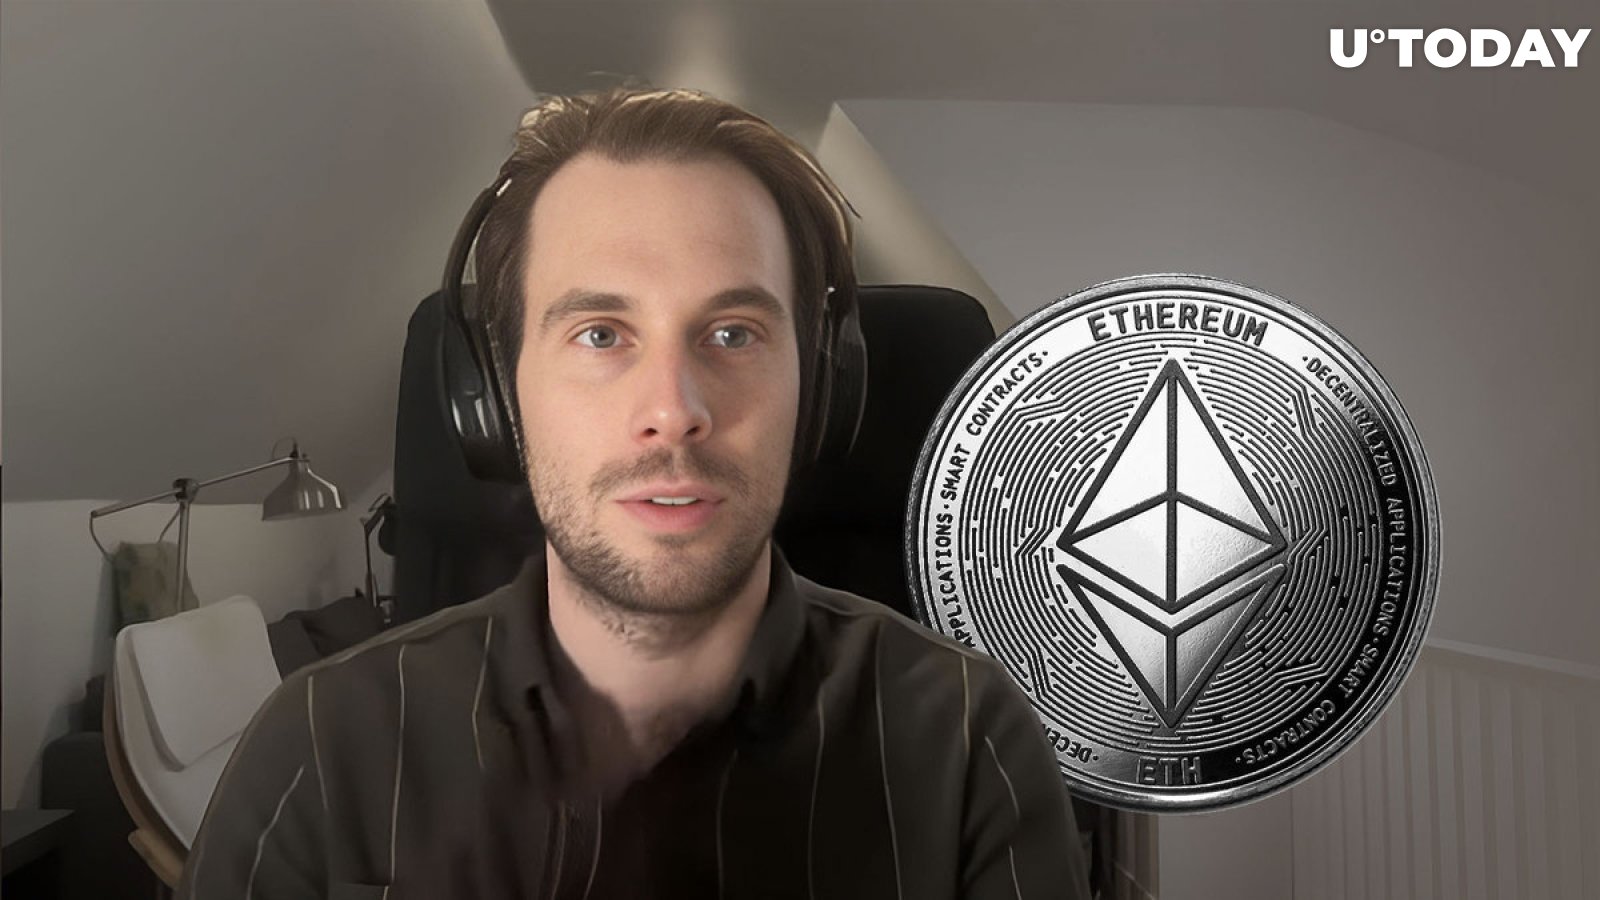 Ethereum Foundation Hacked, Tim Beiko Confirms: What Happened?